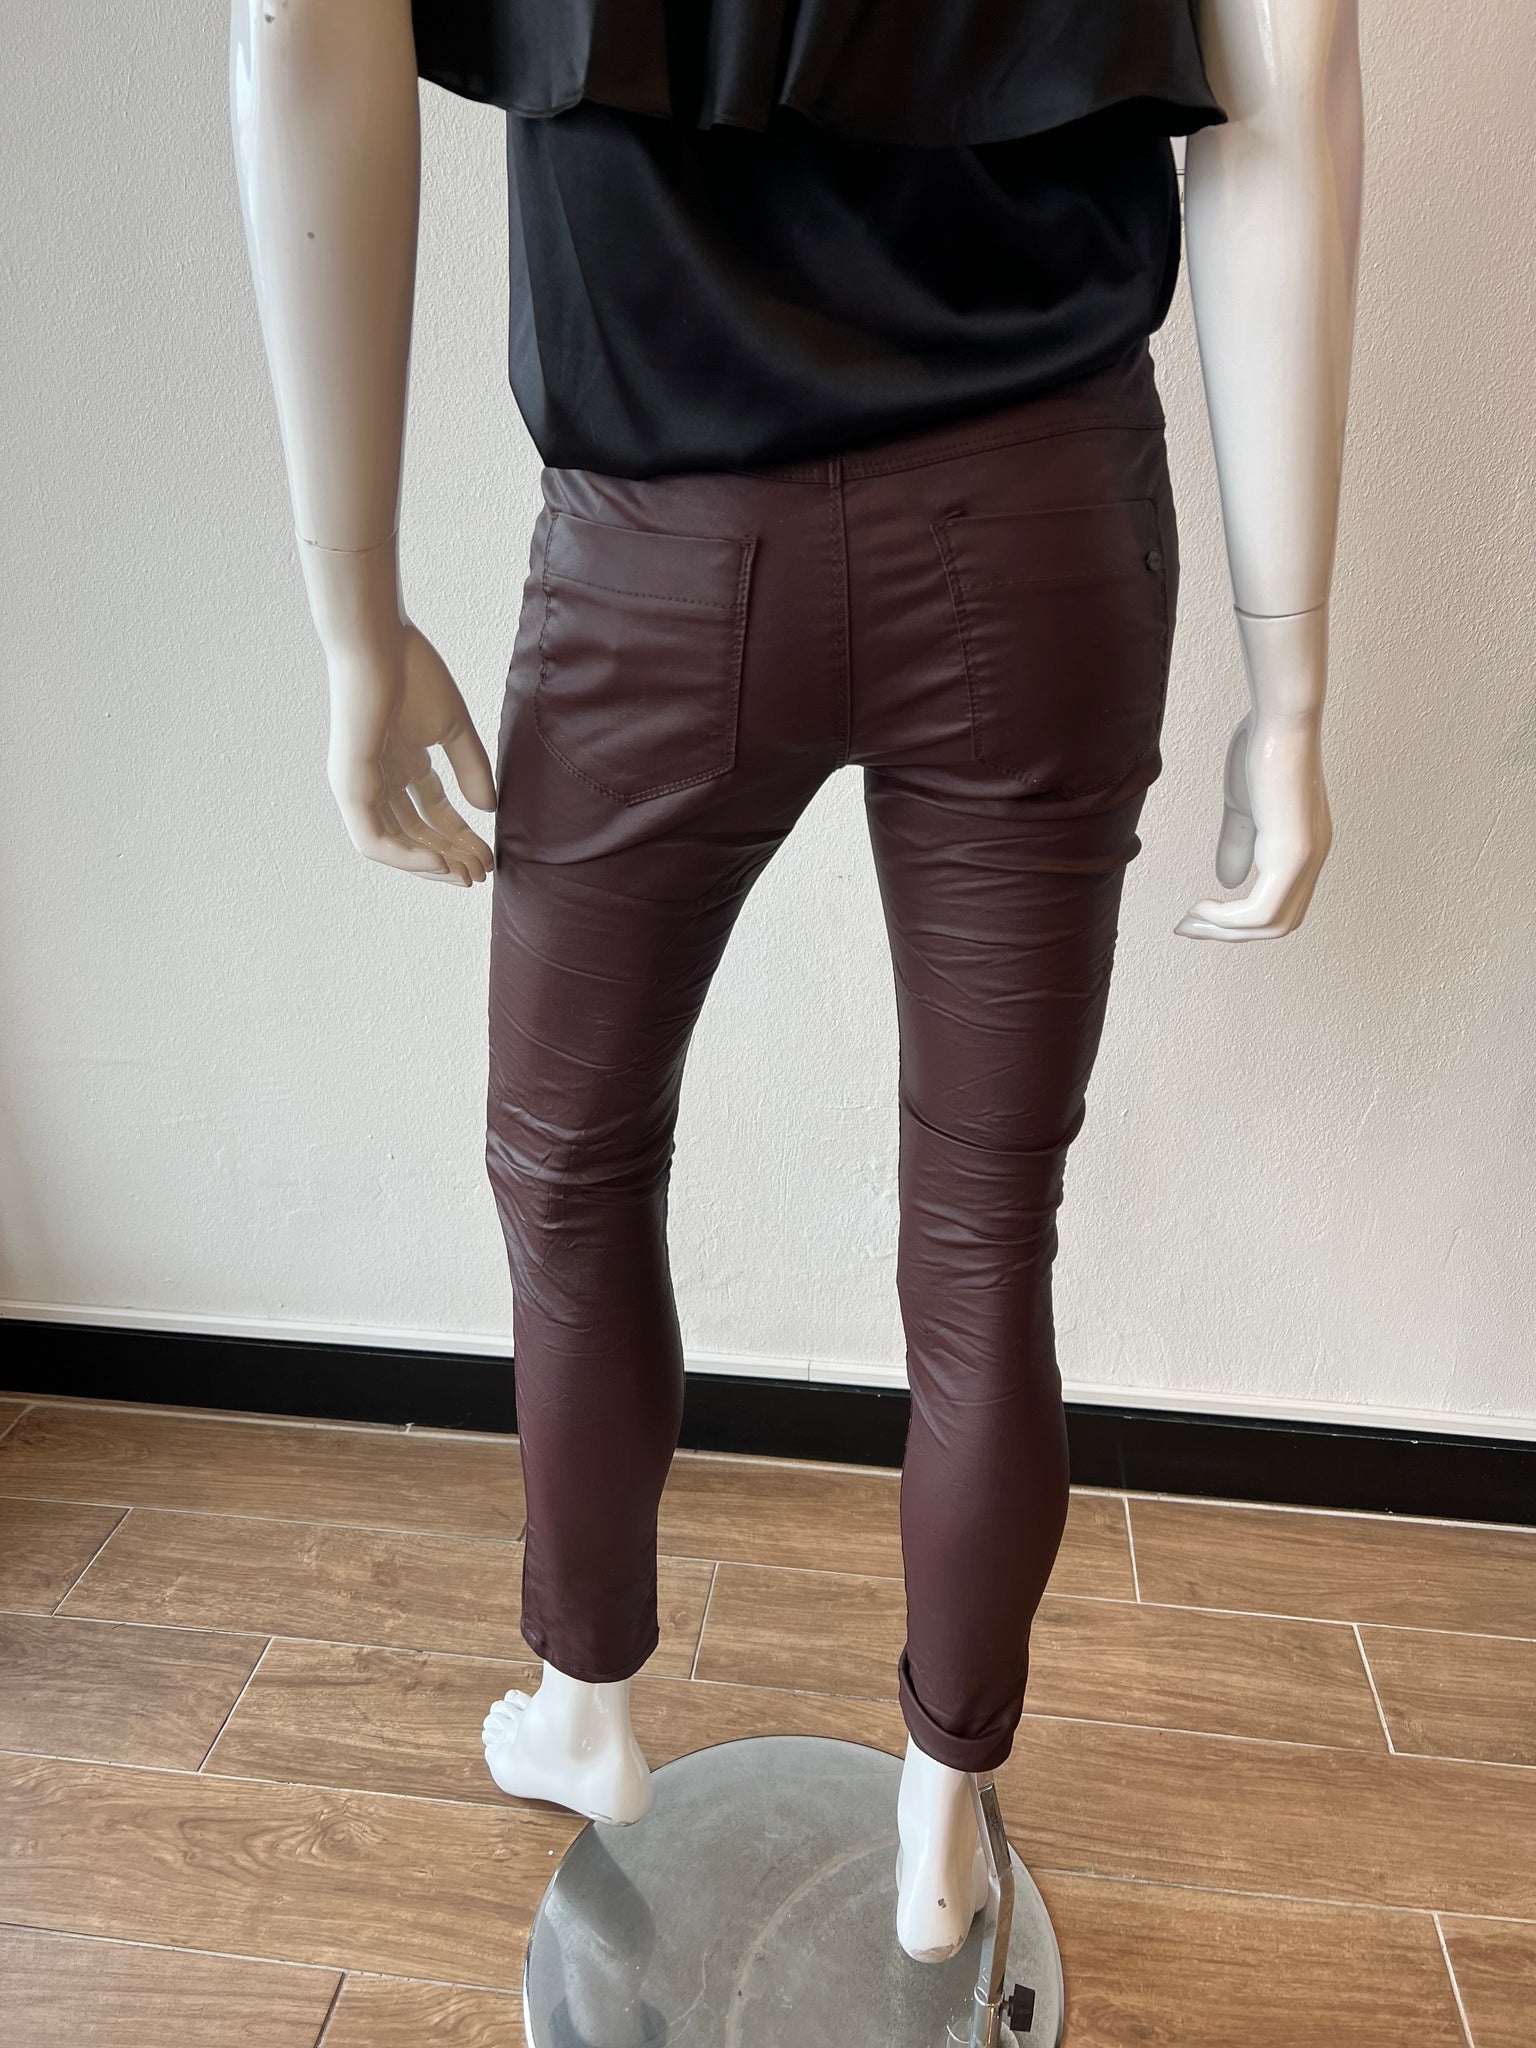 Pernille Faux Leather Pants - Burgundy